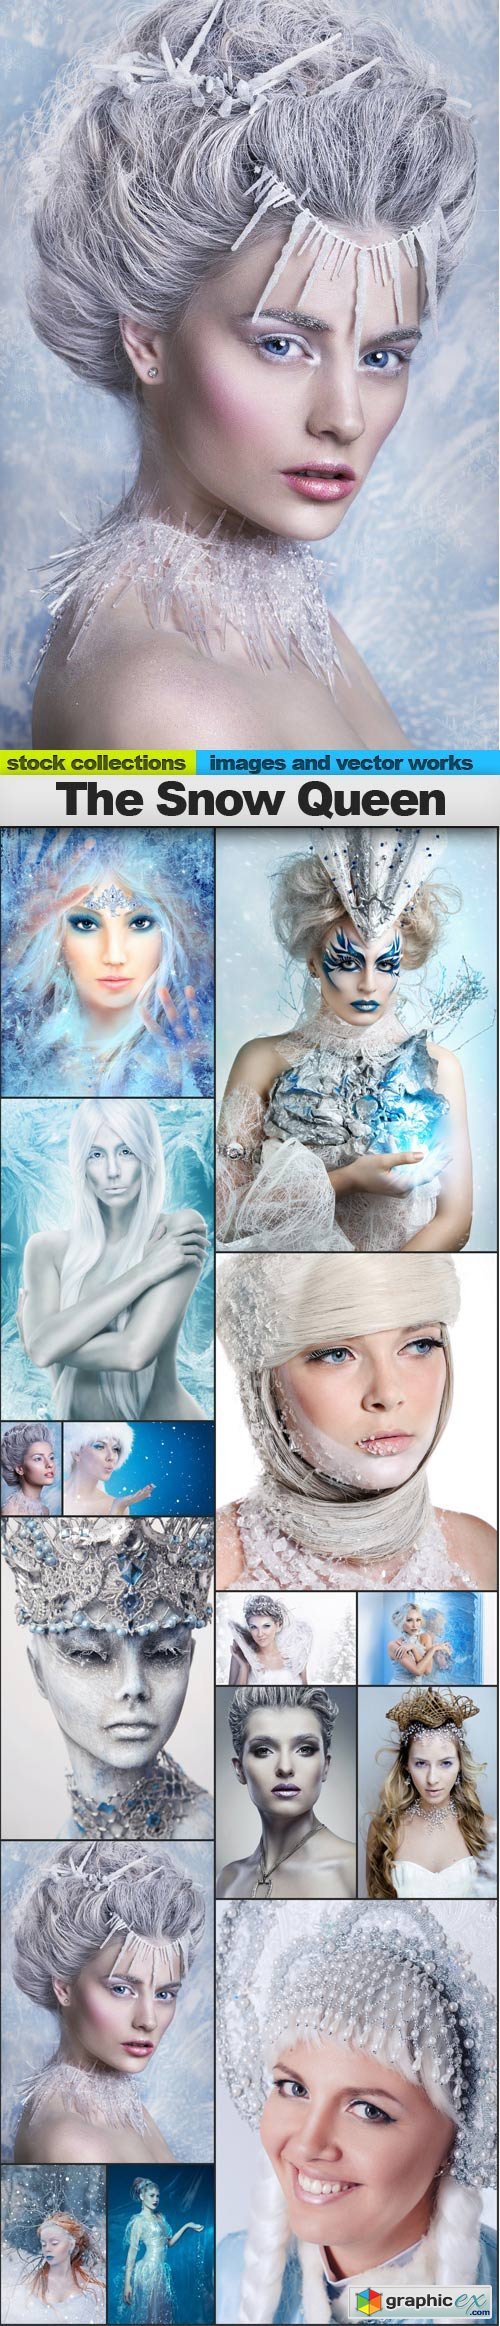 The Snow Queen, 15 x UHQ JPEG